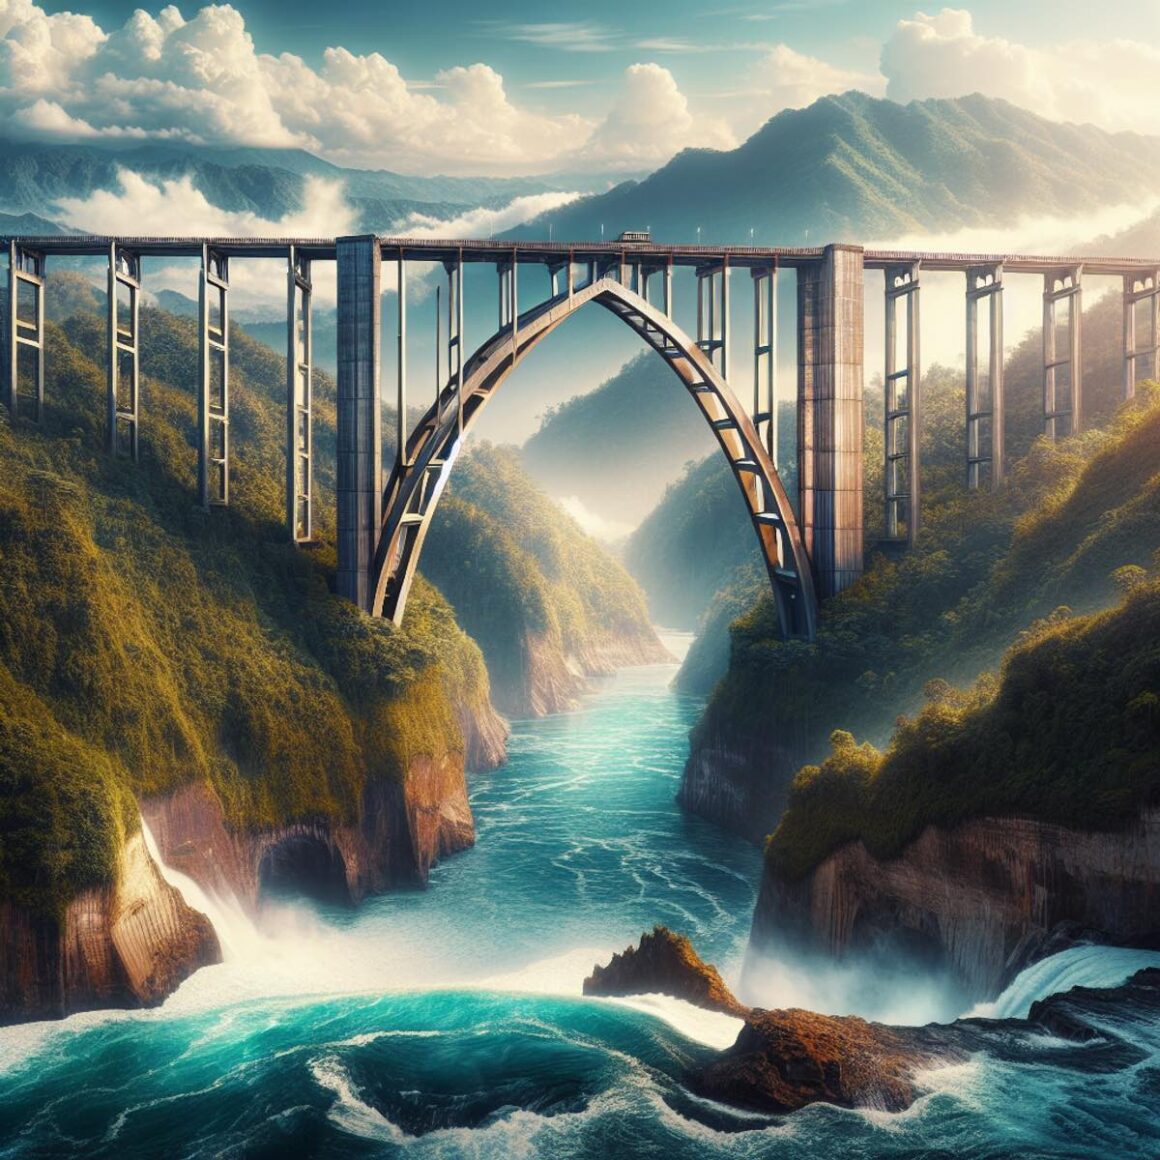 A majestic bridge spans a wide river in a mountainous region, with lush greenery and clear blue skies surrounding it.